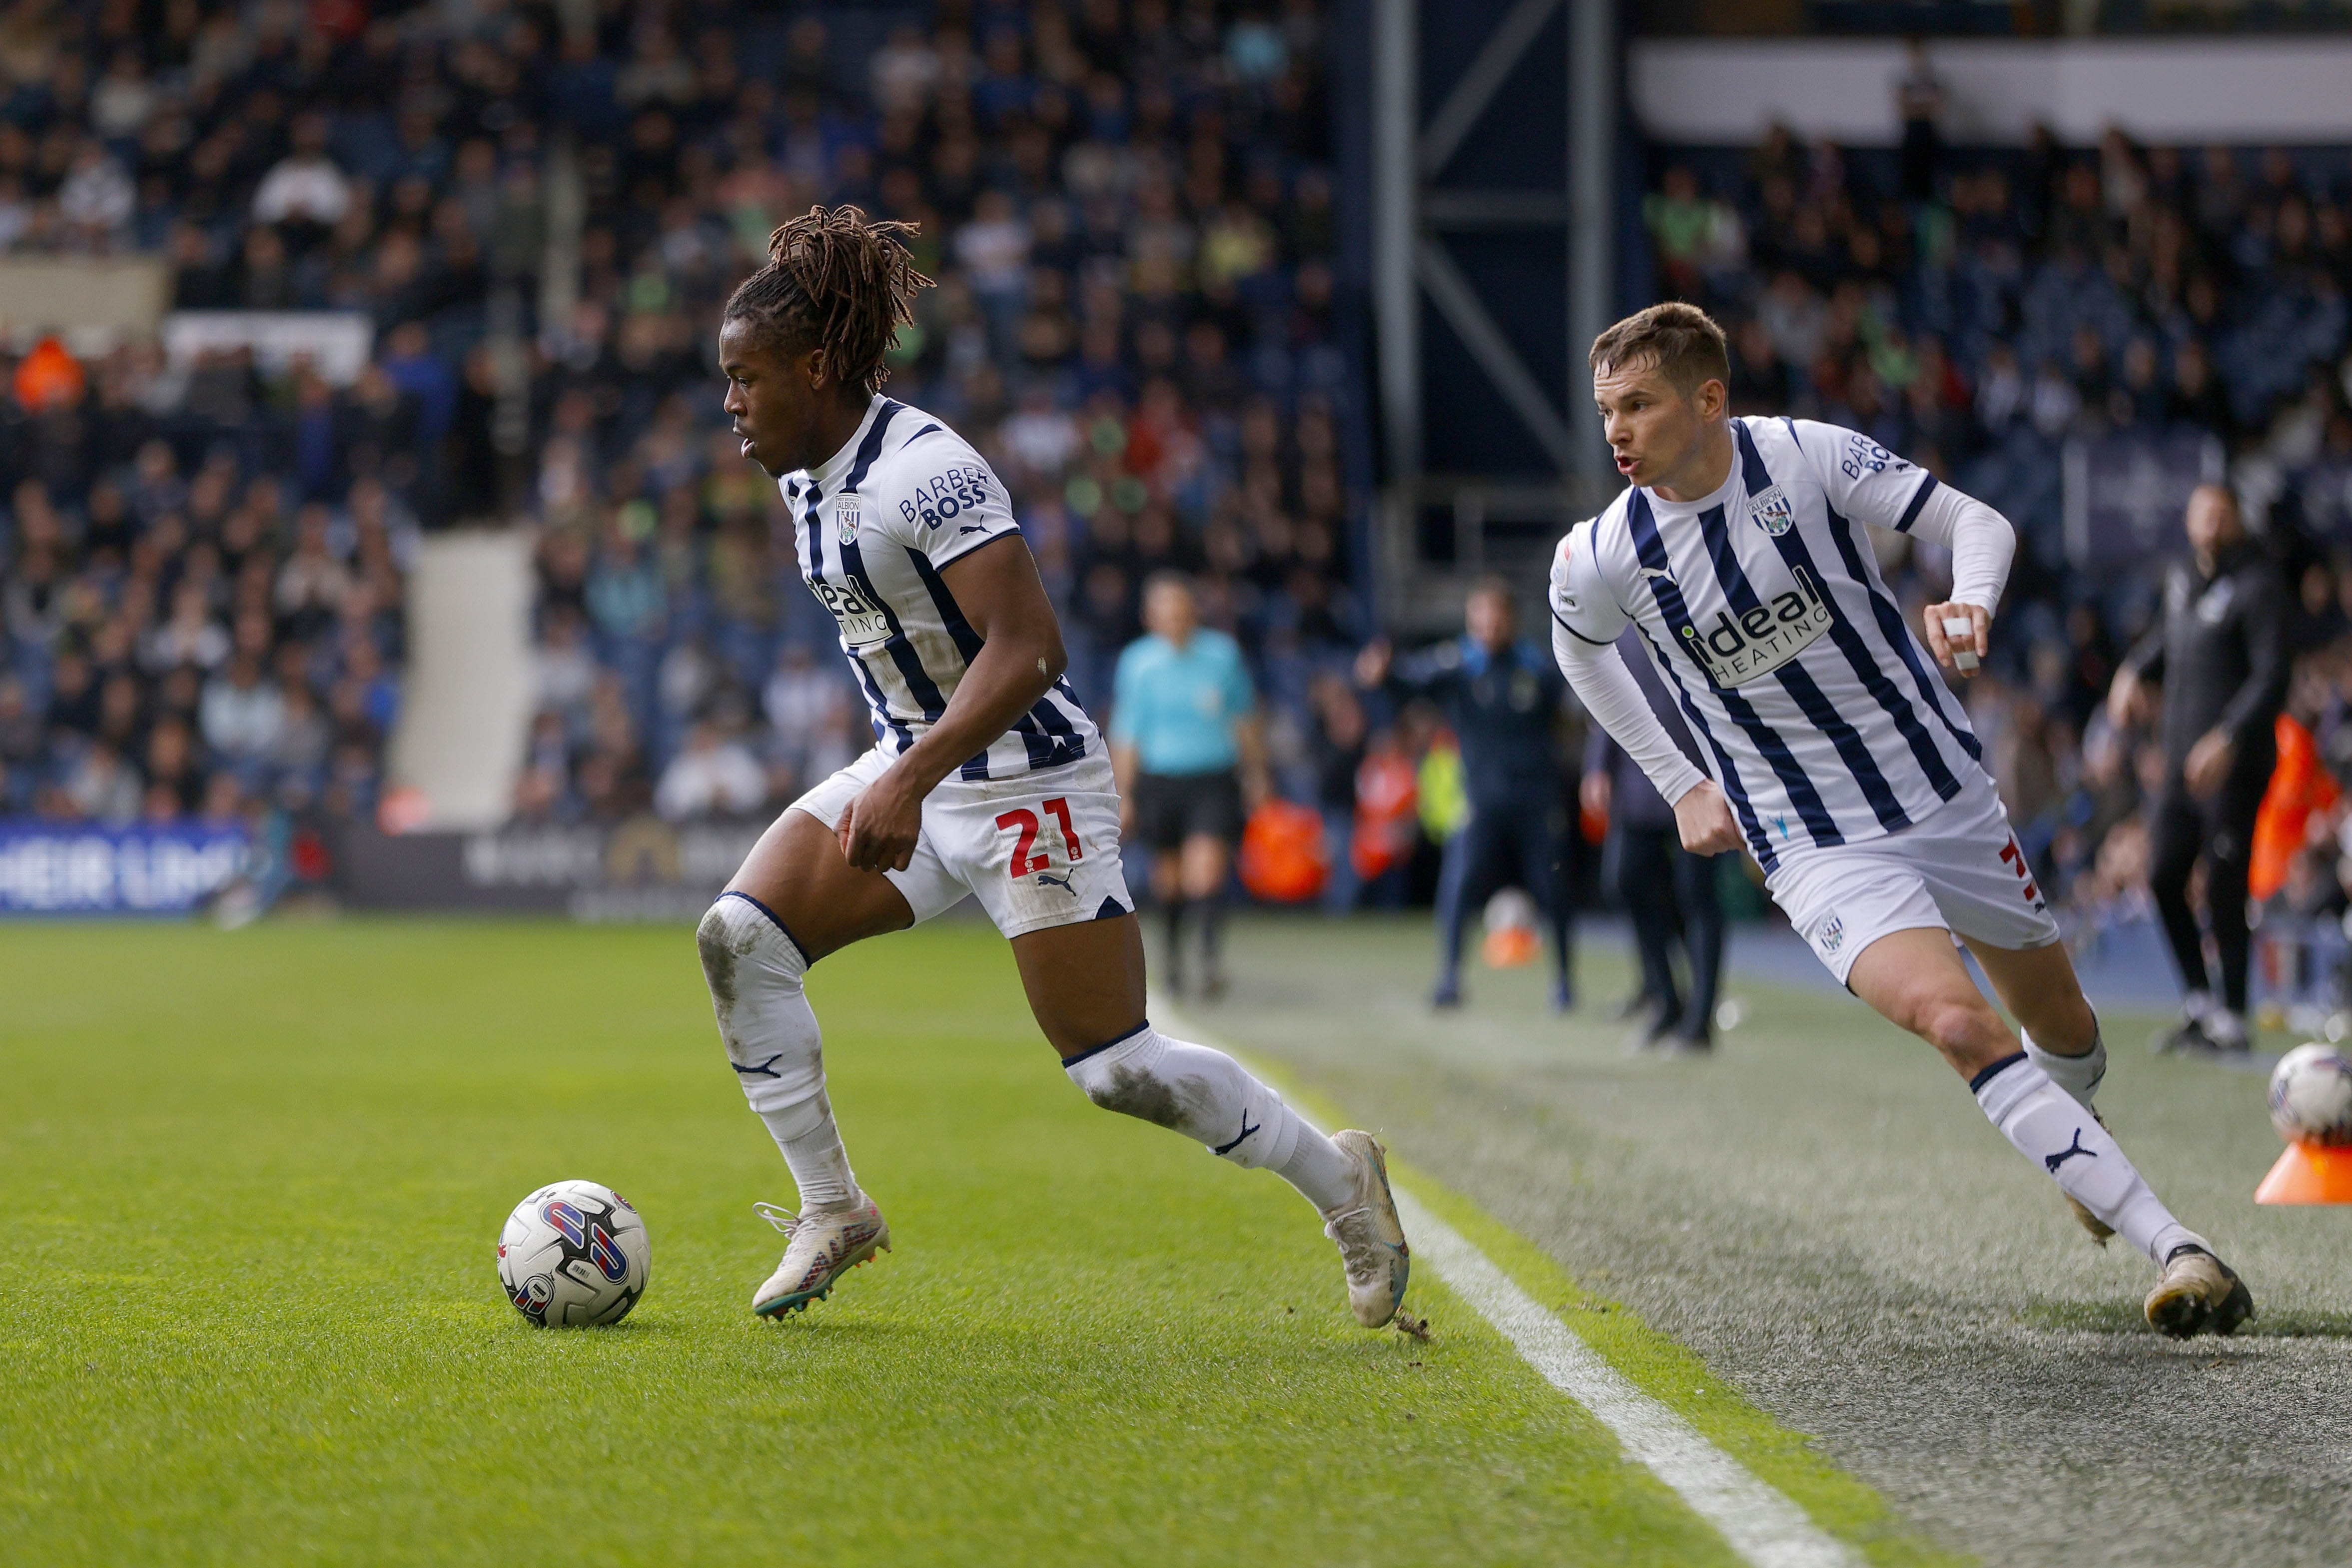 Brandon Thomas-Asante running with the ball against Watford with Conor Townsend behind him